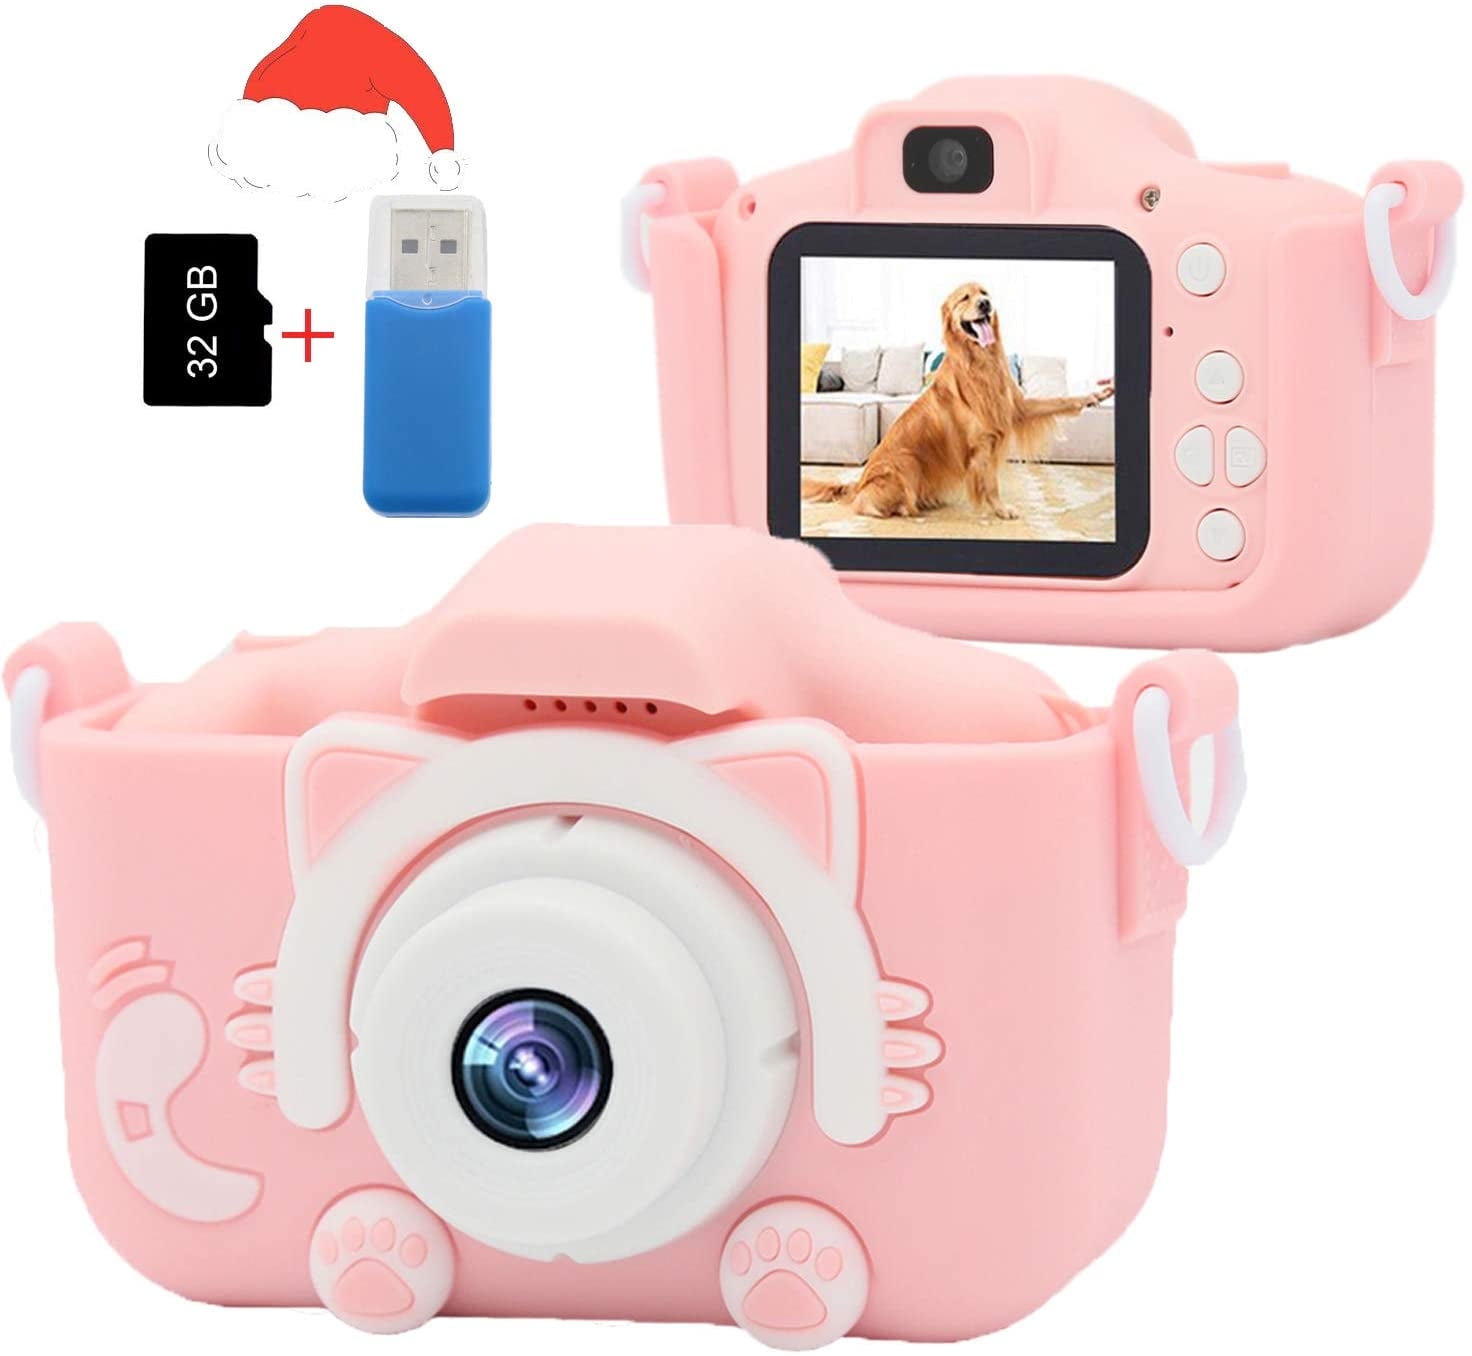 Mini Dual Digital Camera Gift for 3-10 Years Old Kids on Birthday Instant Film&Photo Best Rechargeable Shockproof Photography Toy Girls&Boys-Baby&Children 32 GB Card Pink/Blue Soft Silicone Shell 